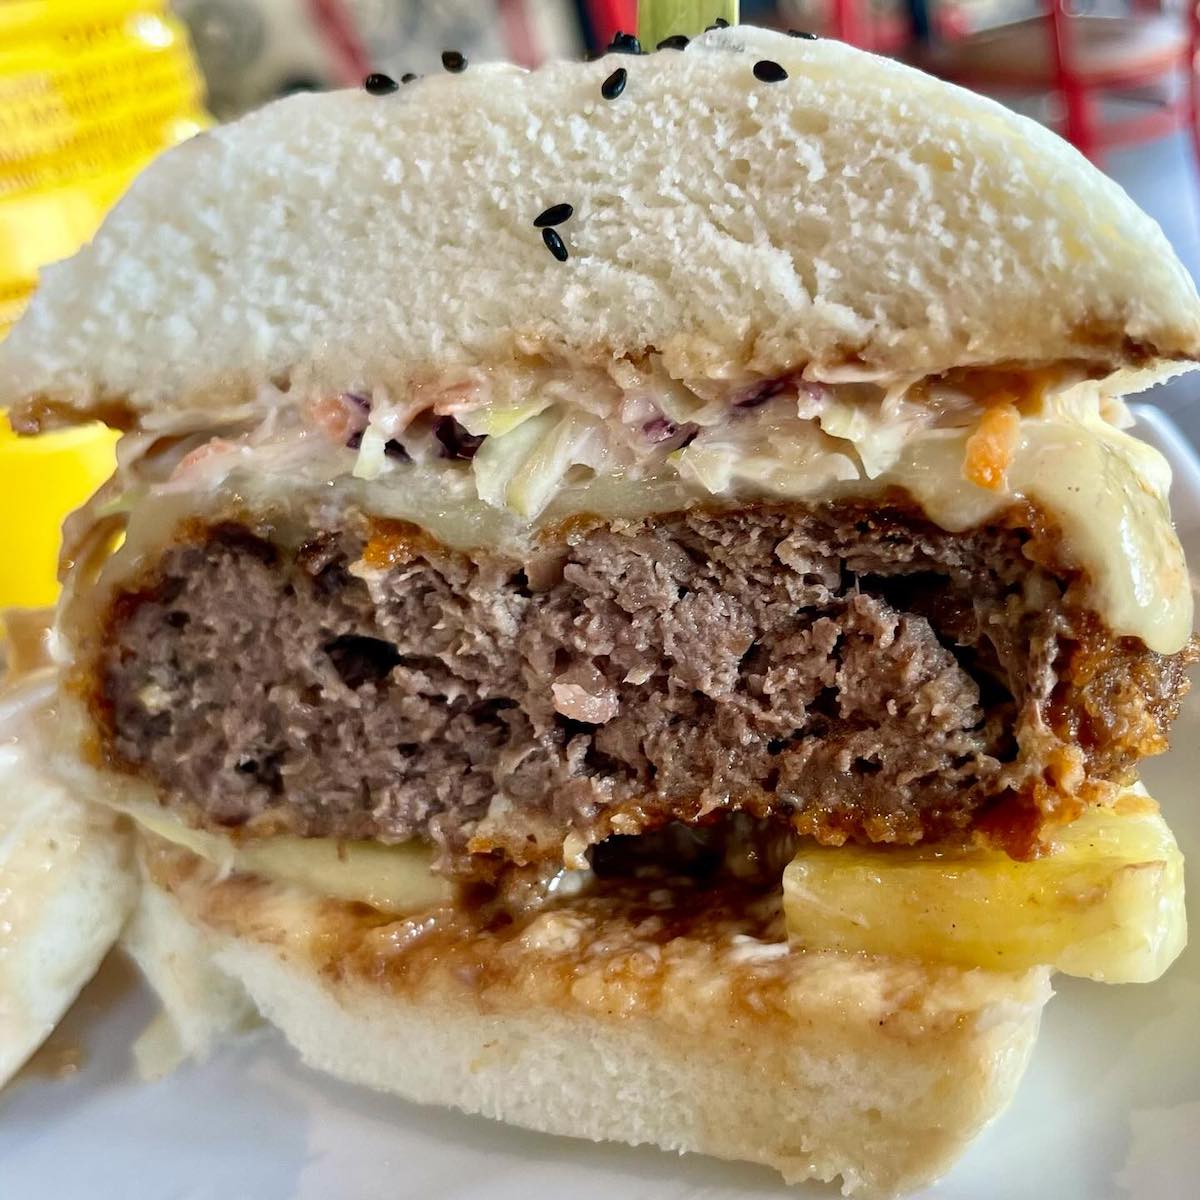 The Katsu Bao Burger from Temple Street Eatery in Fort Lauderdale, Florida